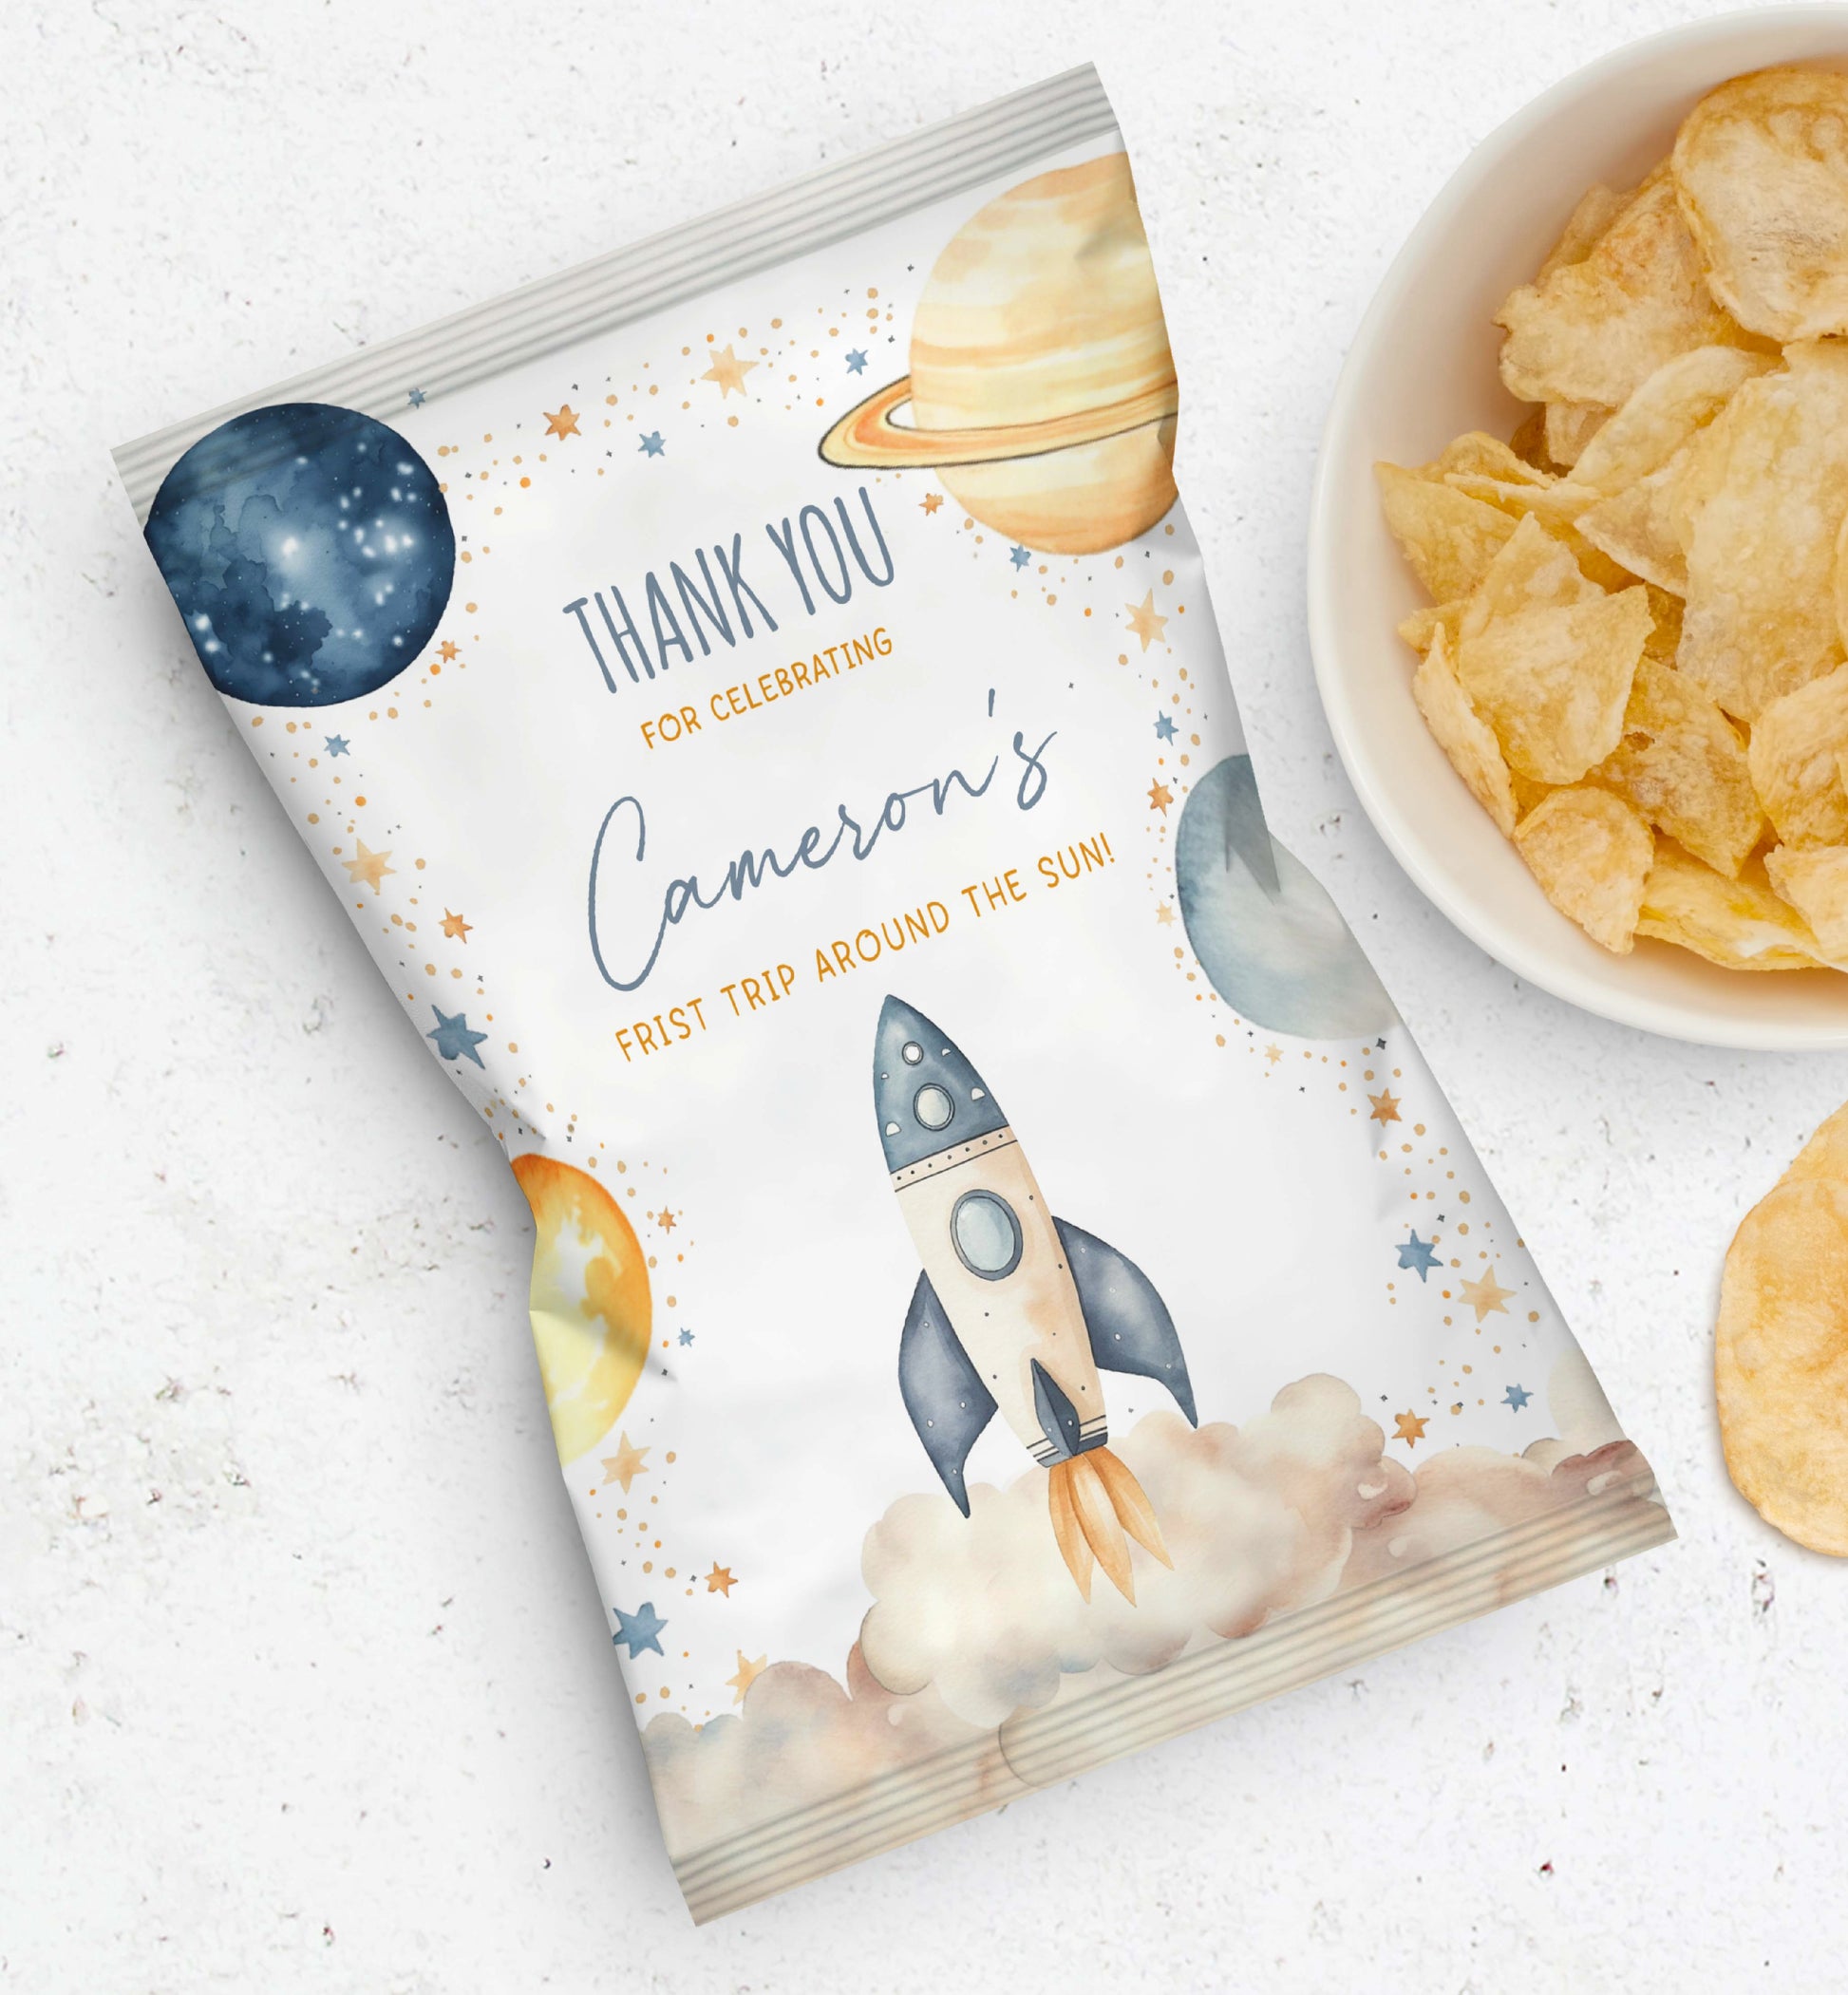 Birthday Party Chip Bag Wrapper Favors, First Trip Around The Sun Birthday Printable Chip Crisp Bag Favors, Outer Space Planets Galaxy Party